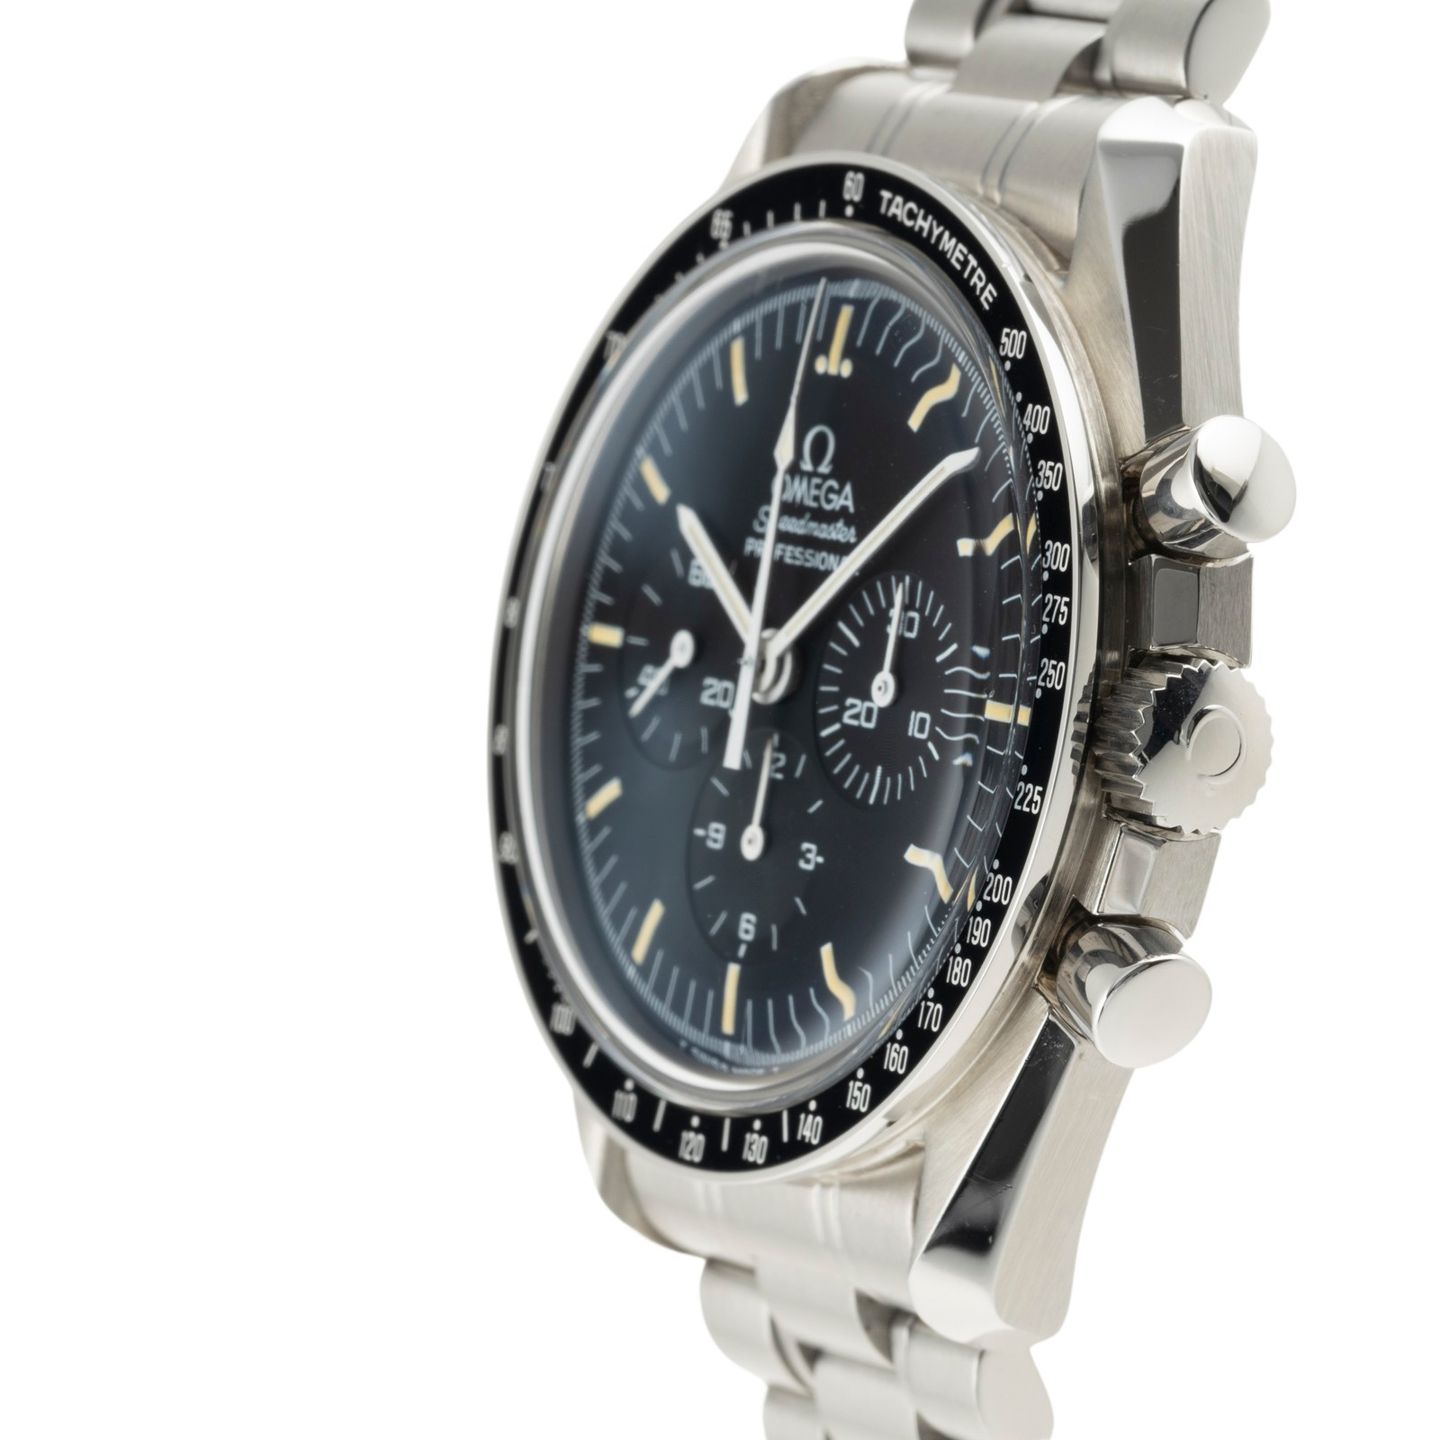 Omega Speedmaster Professional Moonwatch 310.30.42.50.04.001 (1994) - White dial 42 mm Steel case (6/8)